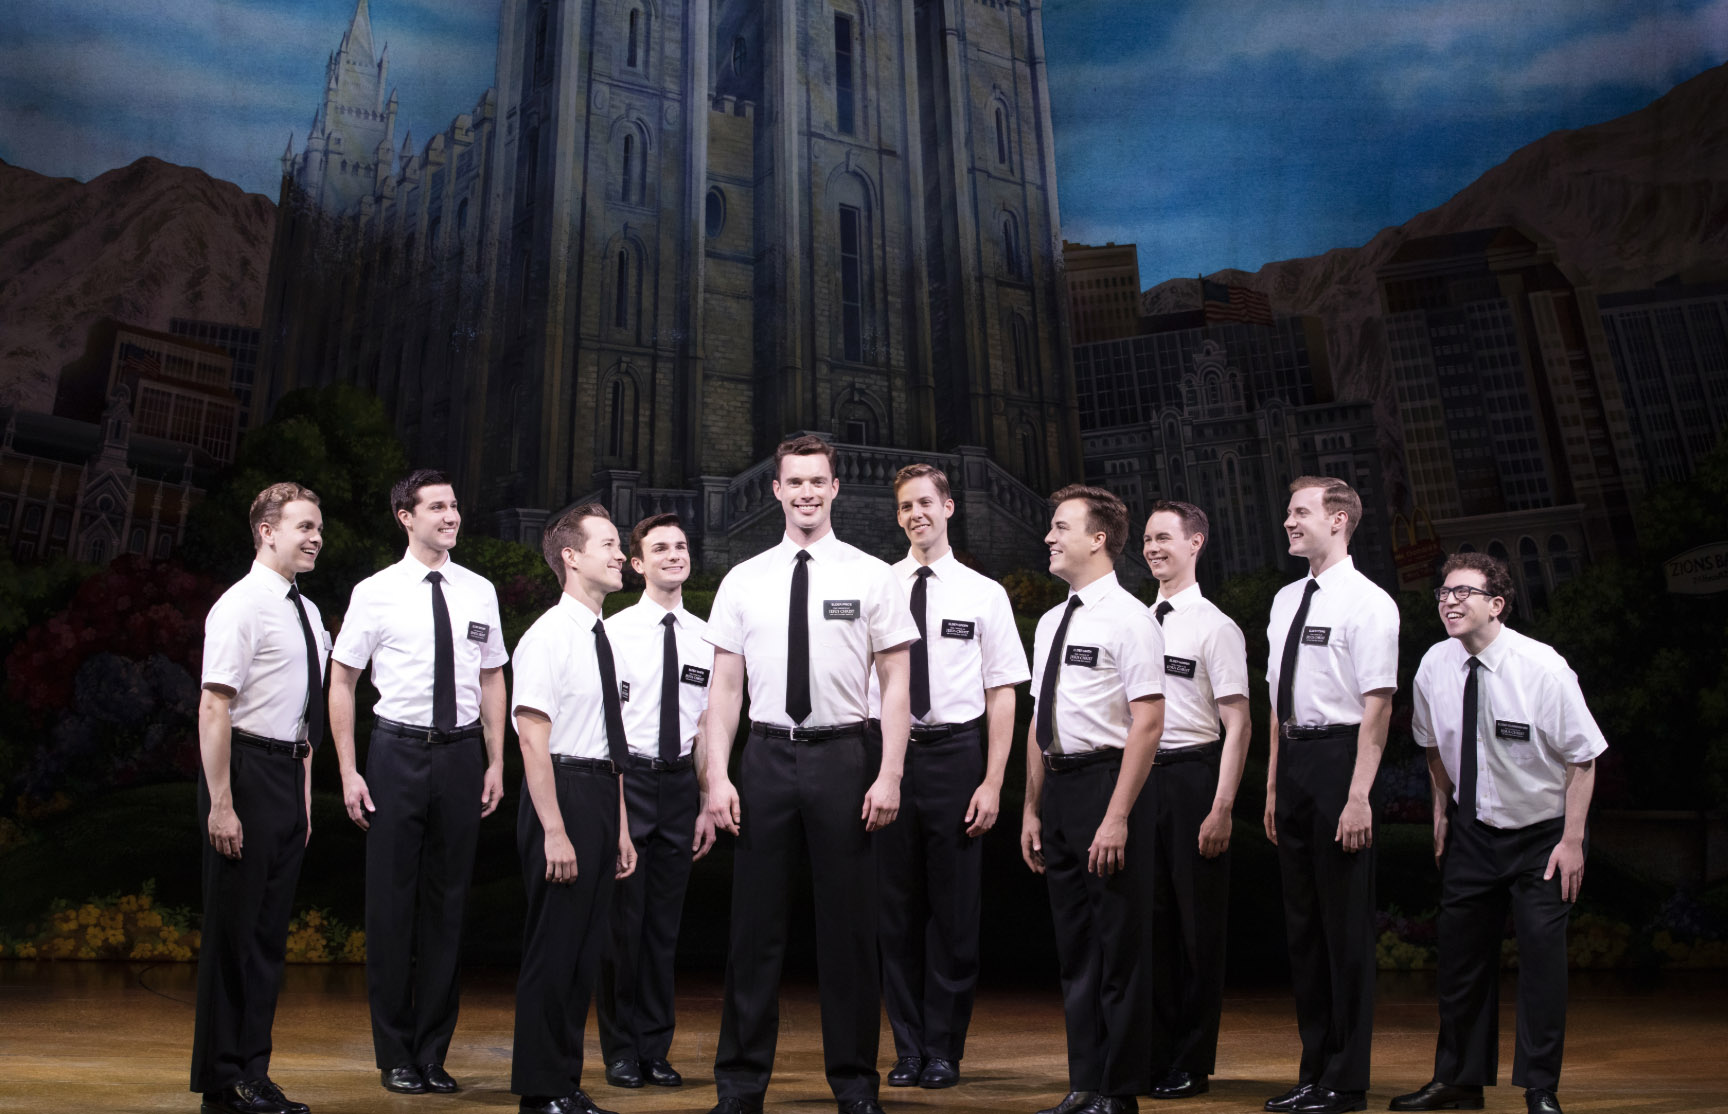 Running thru March 29, 2020: The Book of Mormon at the Ahmanson.